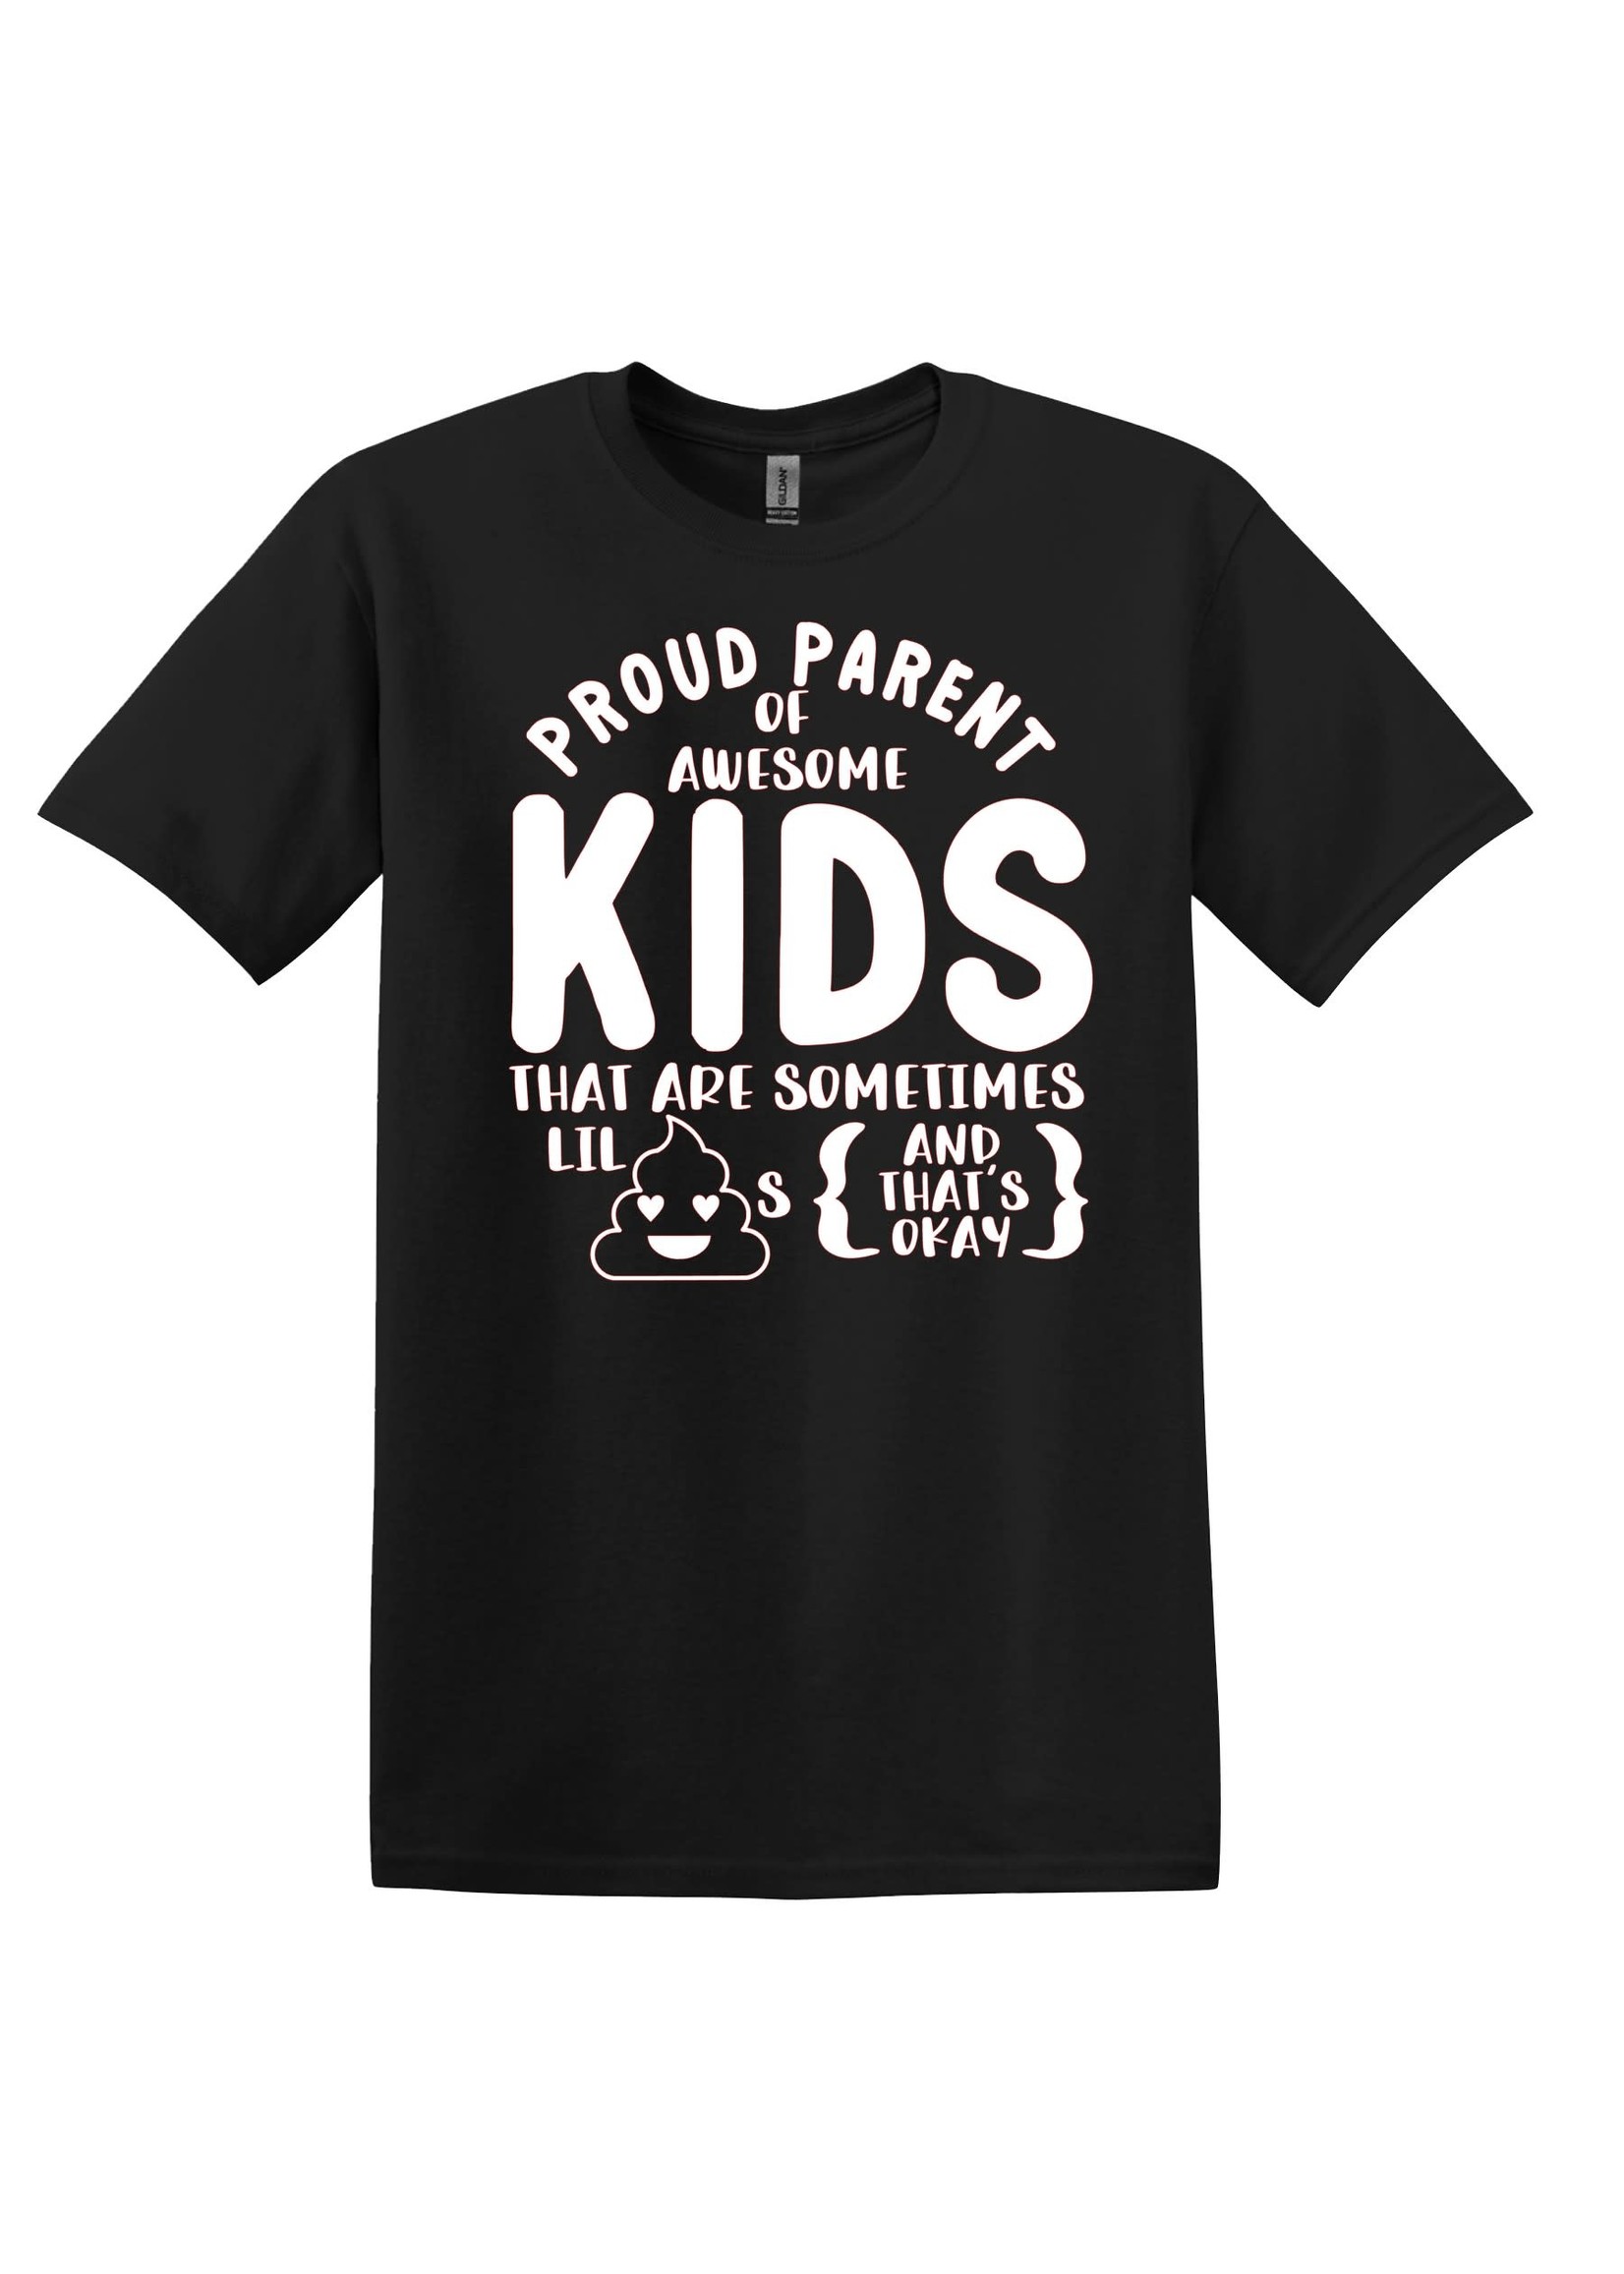 Proud parents of awesome kids